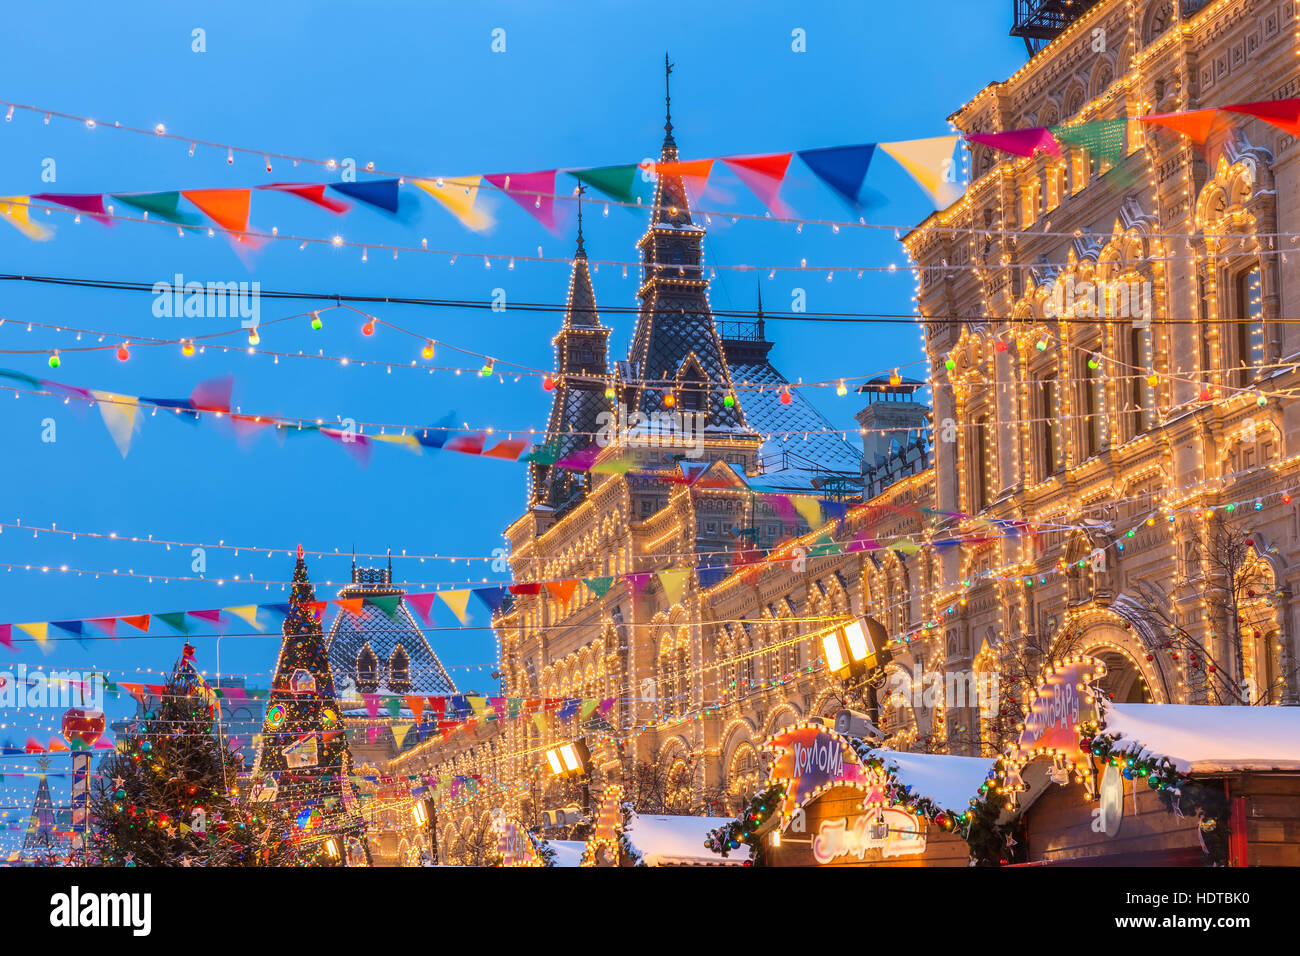 Dusk view of the Christmas market at the Red Square in Moscow, Russia Stock Photo